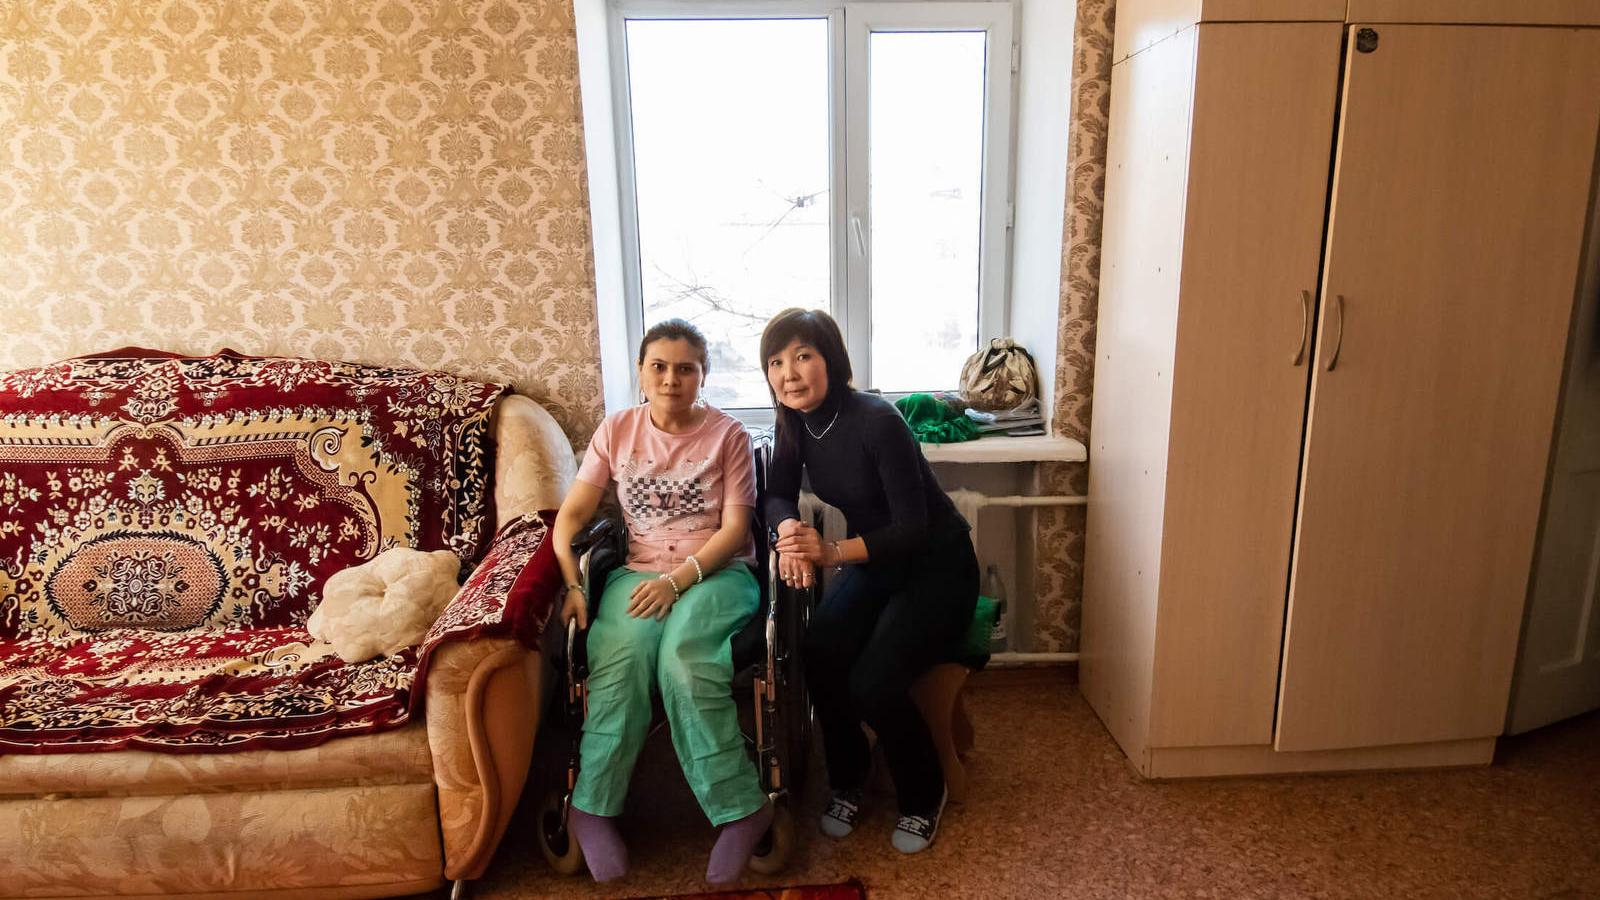 A young woman sits in a wheelchair next to her mom in the living room.